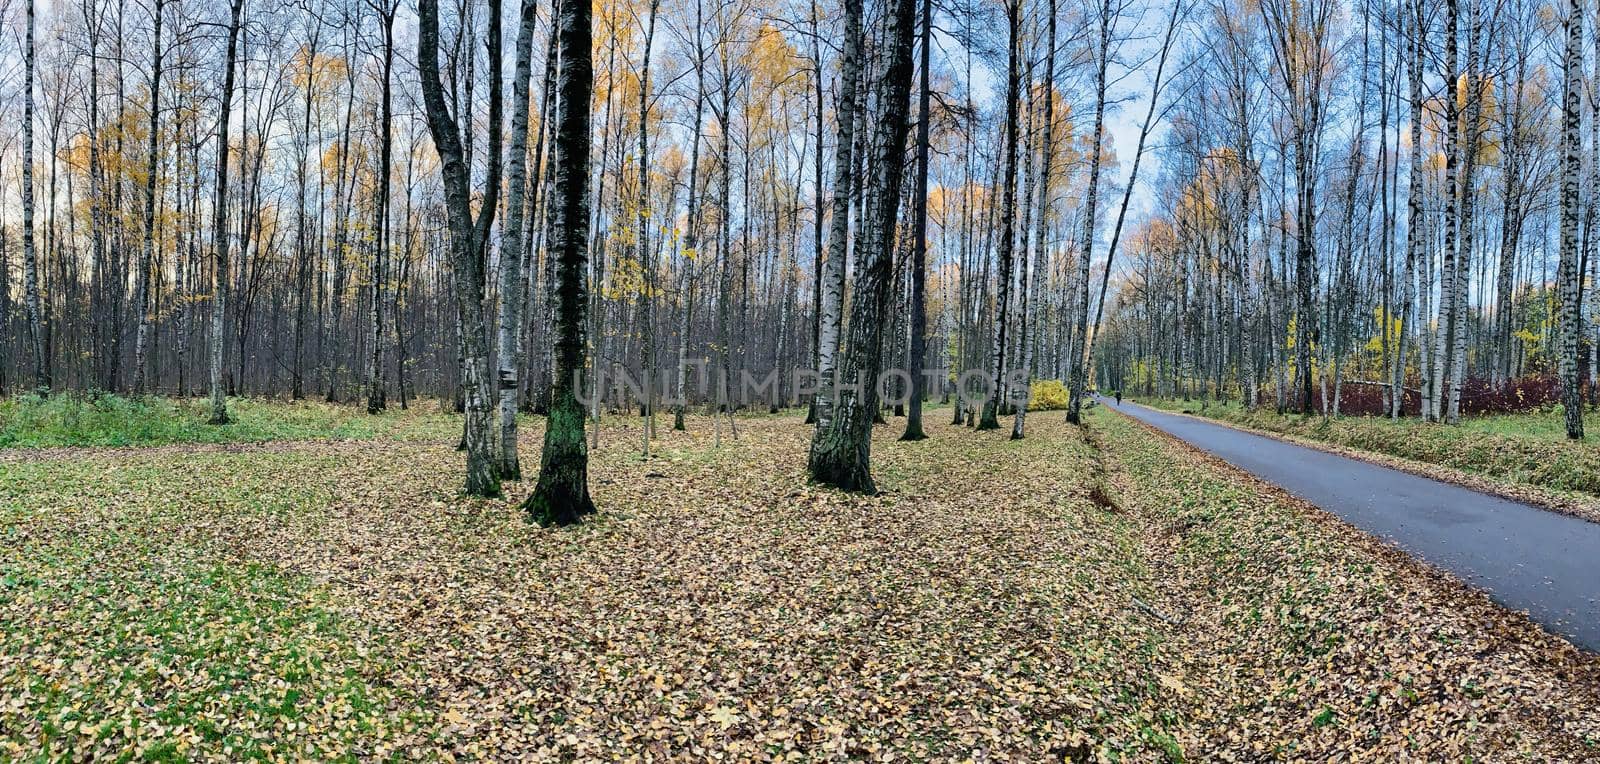 Panorama of first days of autumn in a park, long shadows, blue sky, Buds of trees, Trunks of birches, sunny day, path in the woods, yellow leafs by vladimirdrozdin